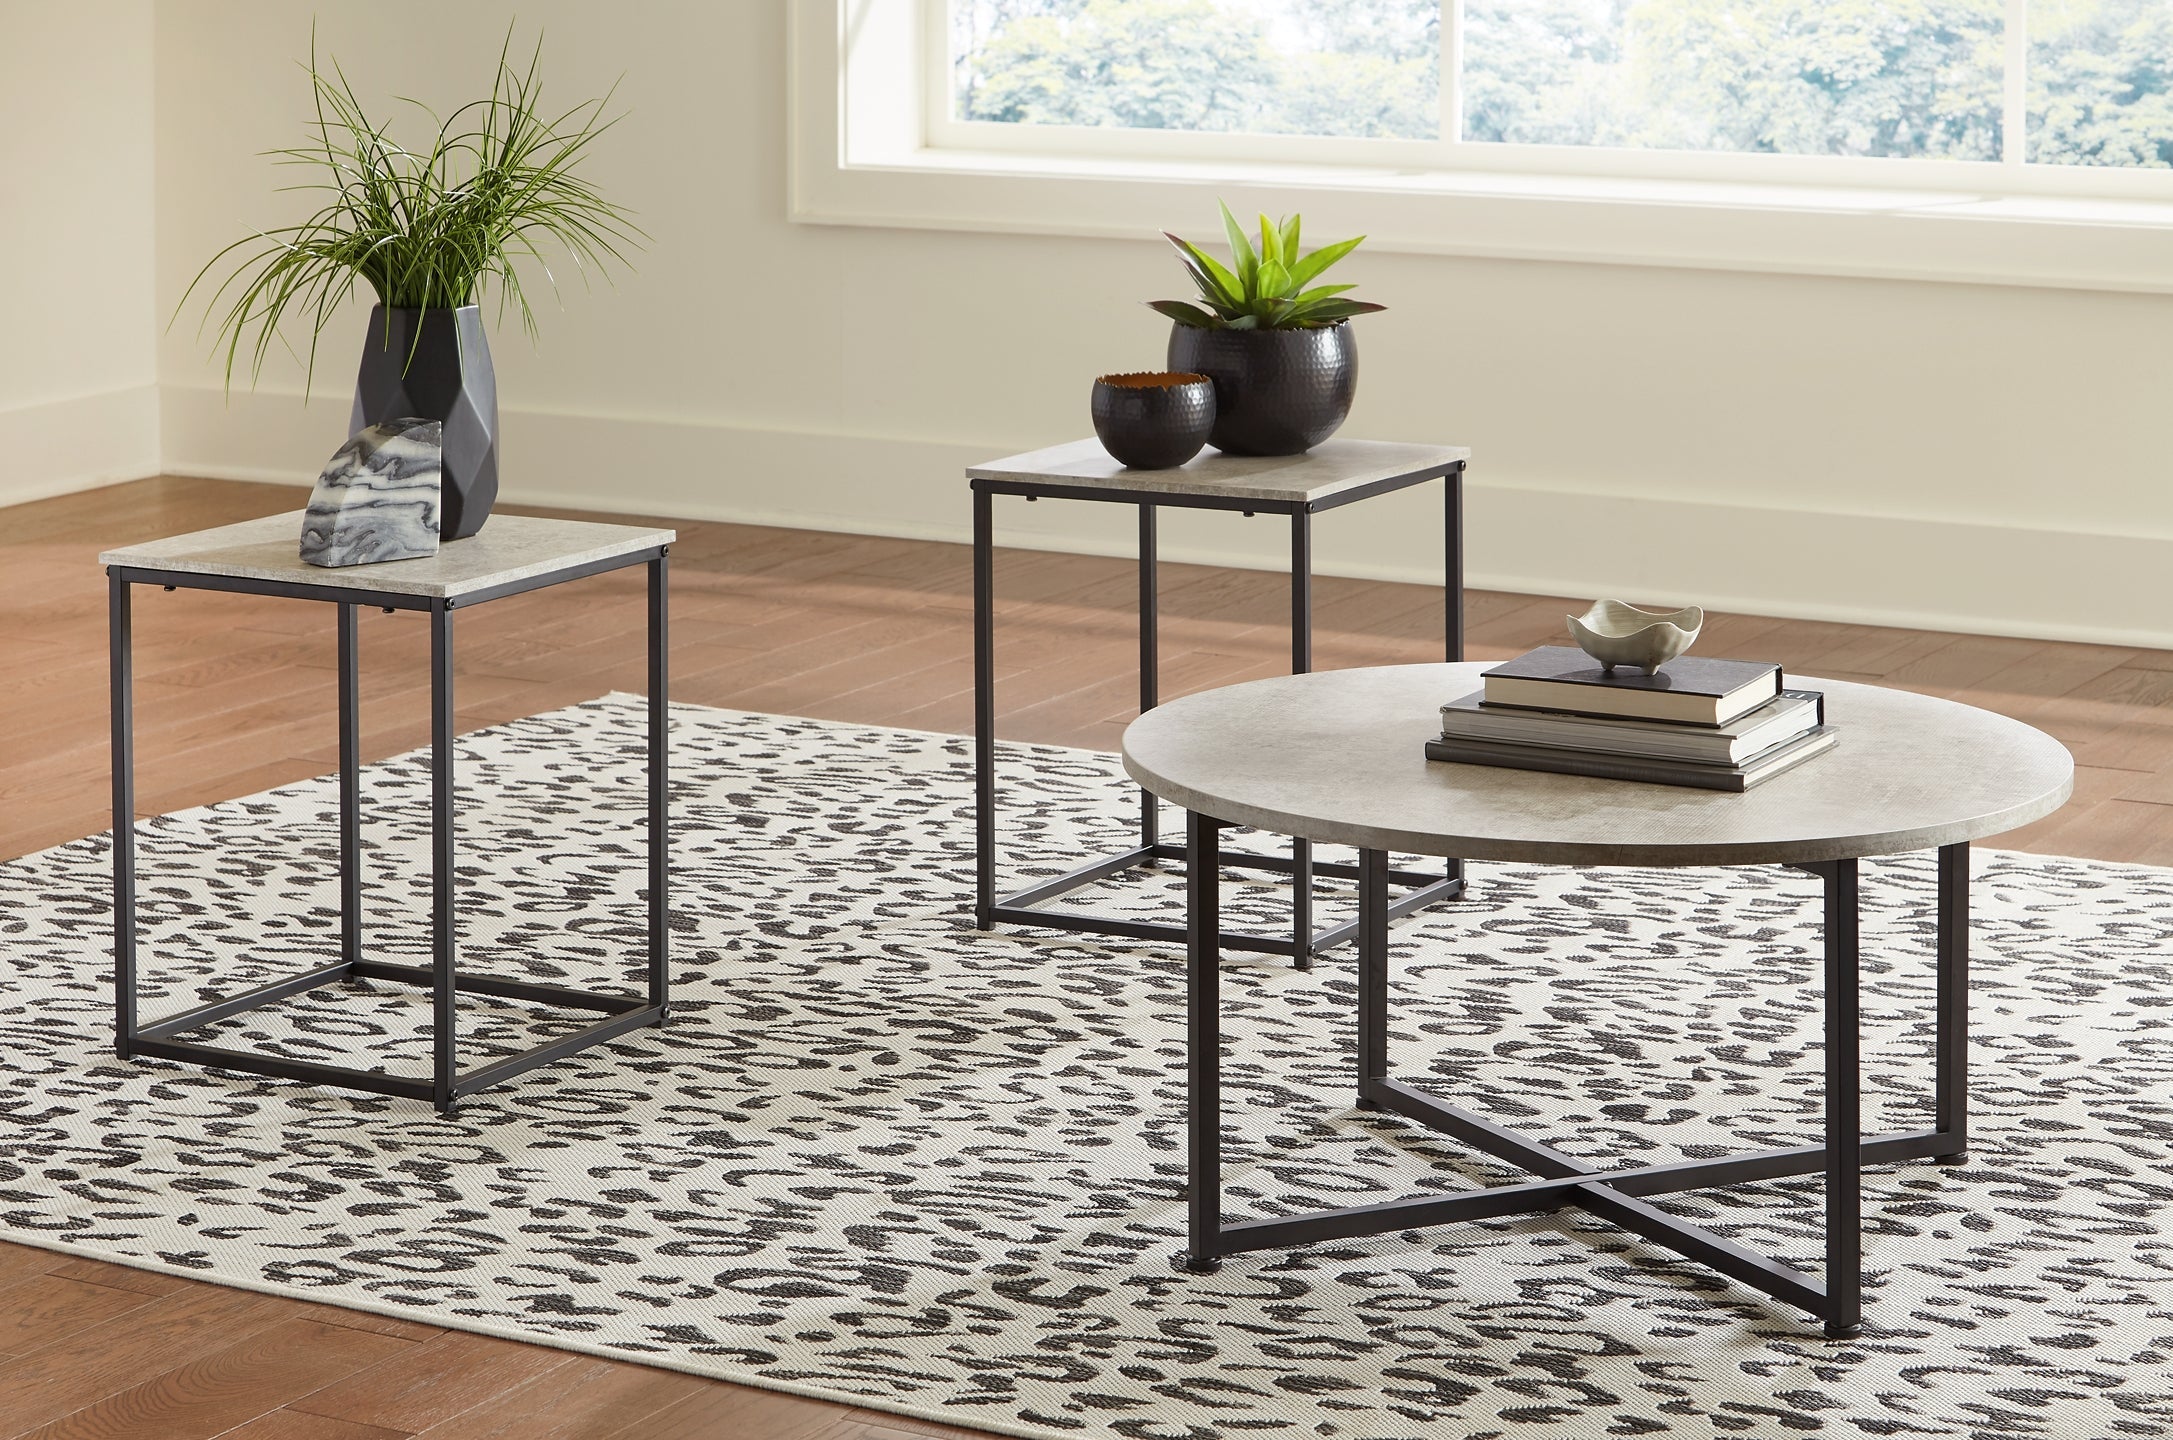 Lazabon Occasional Table (Set of 3)